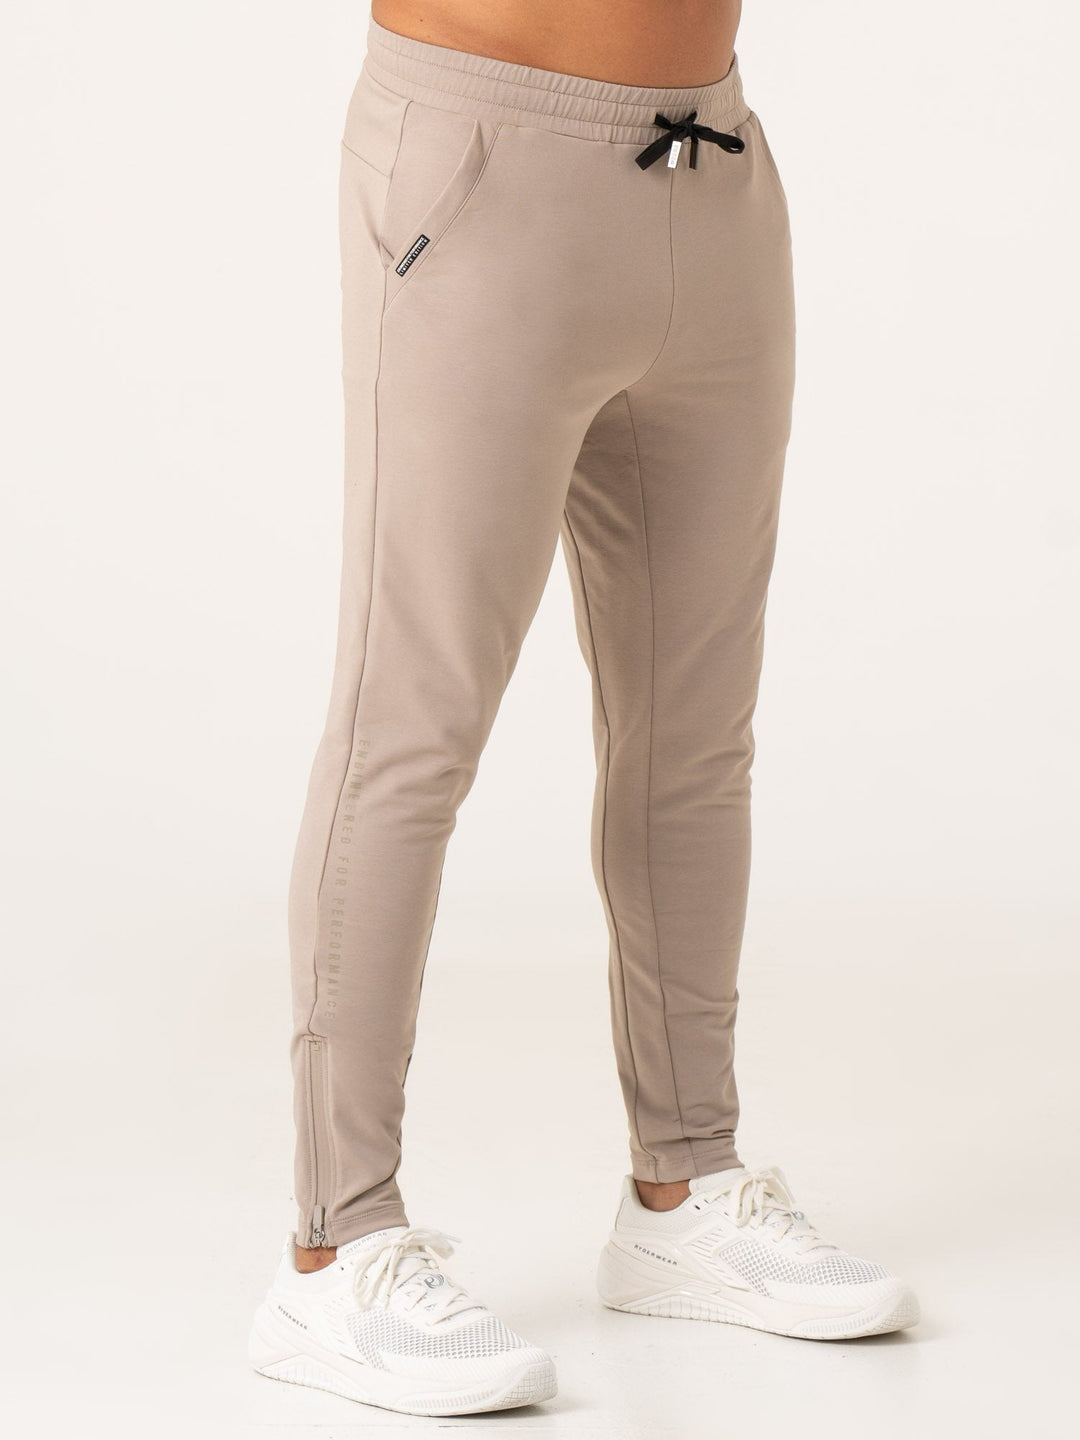 Pursuit Gym Track Pants - Taupe Clothing Ryderwear 